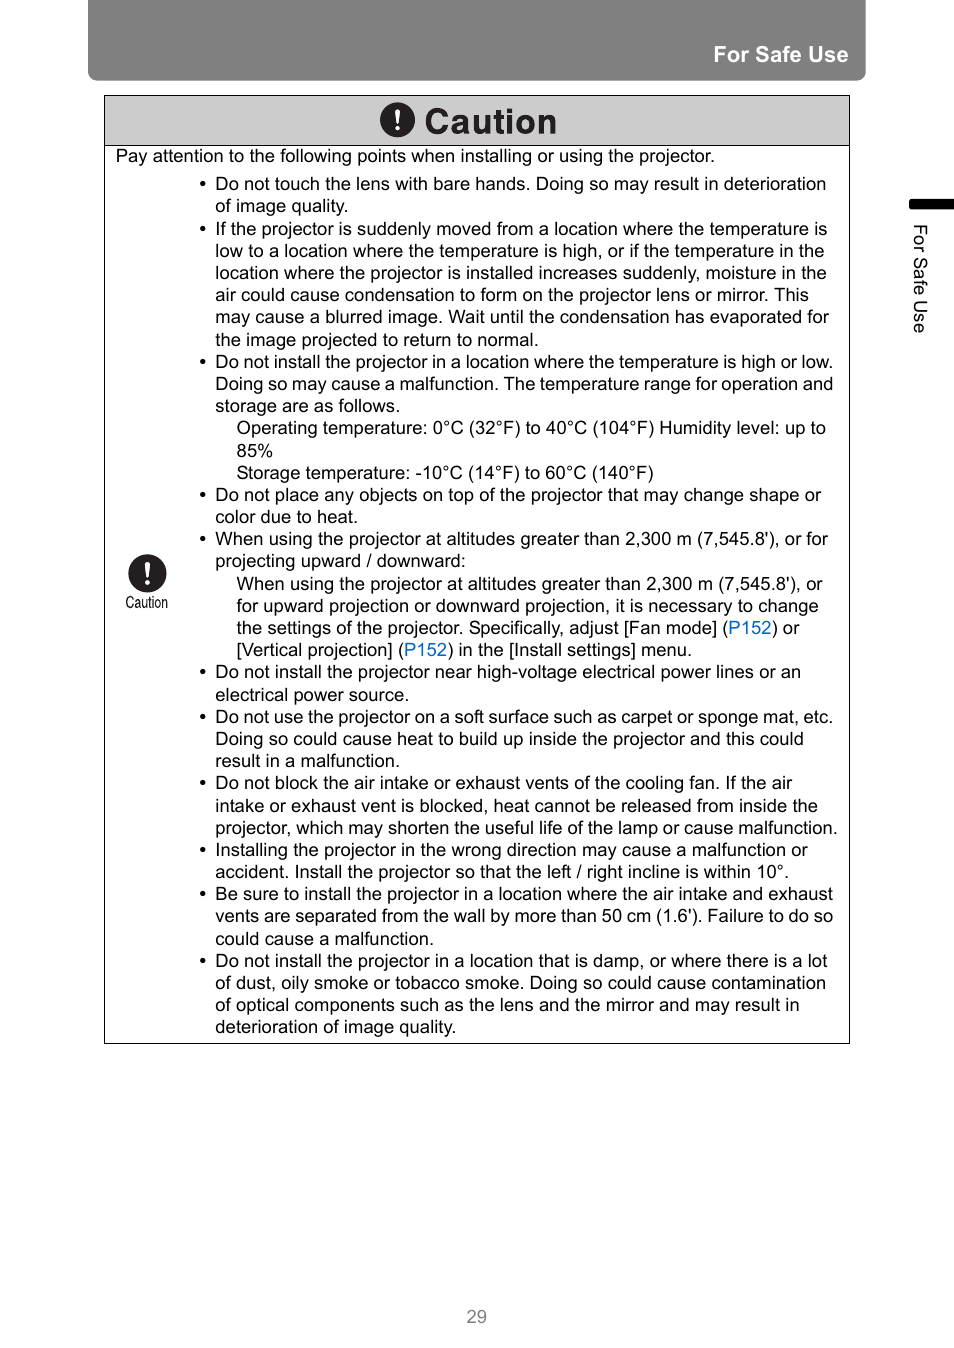 For safe use | Canon XEED WUX450 User Manual | Page 29 / 314